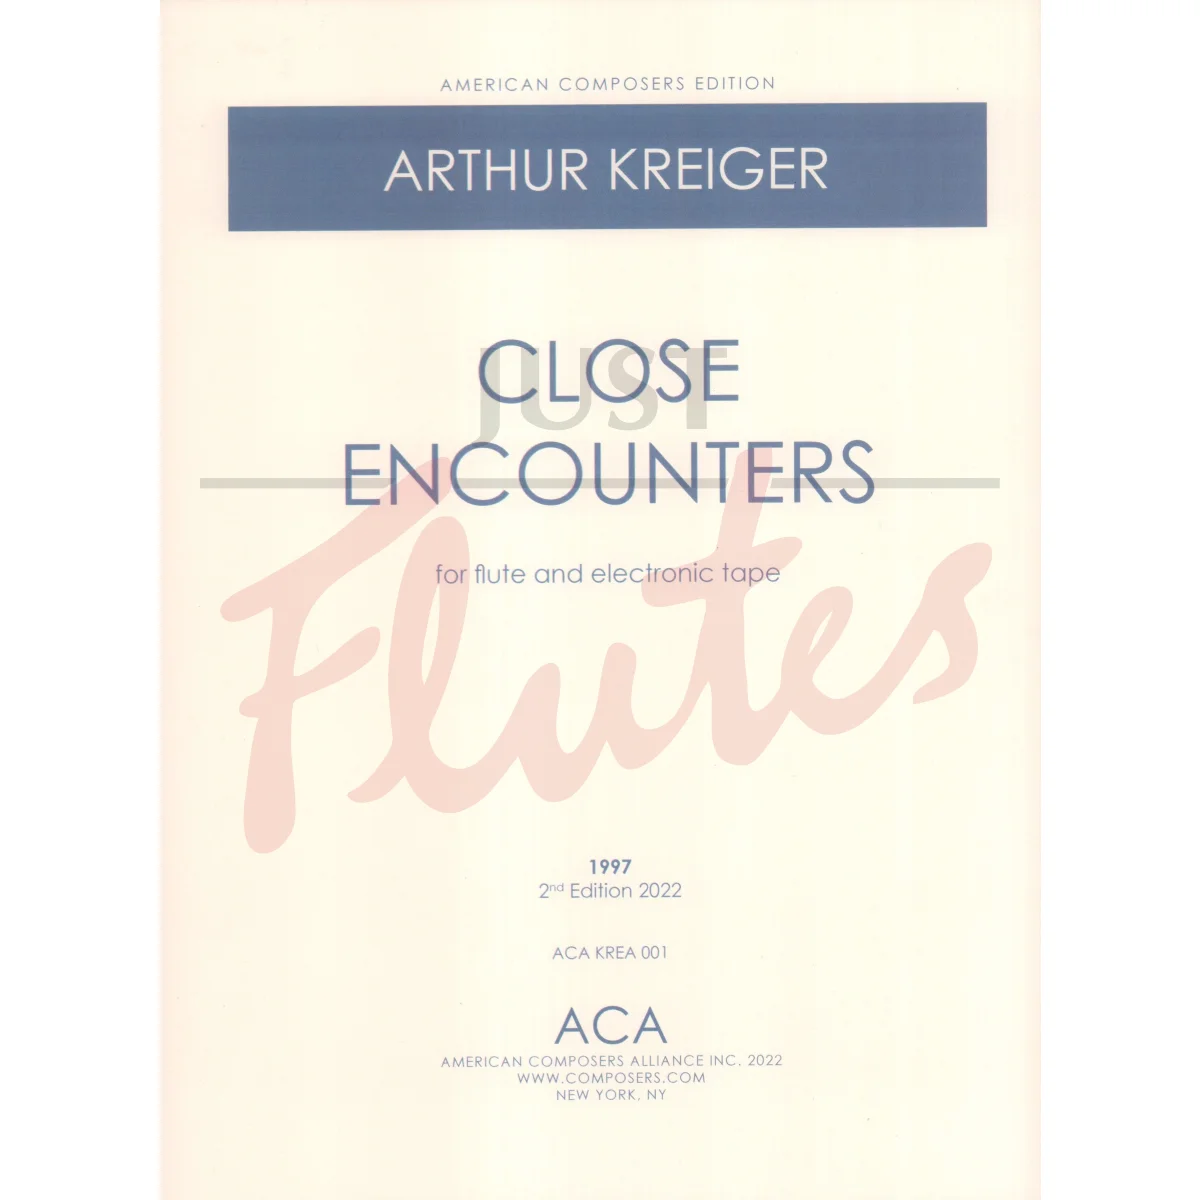 Close Encounters for Flute and Electronic Tape